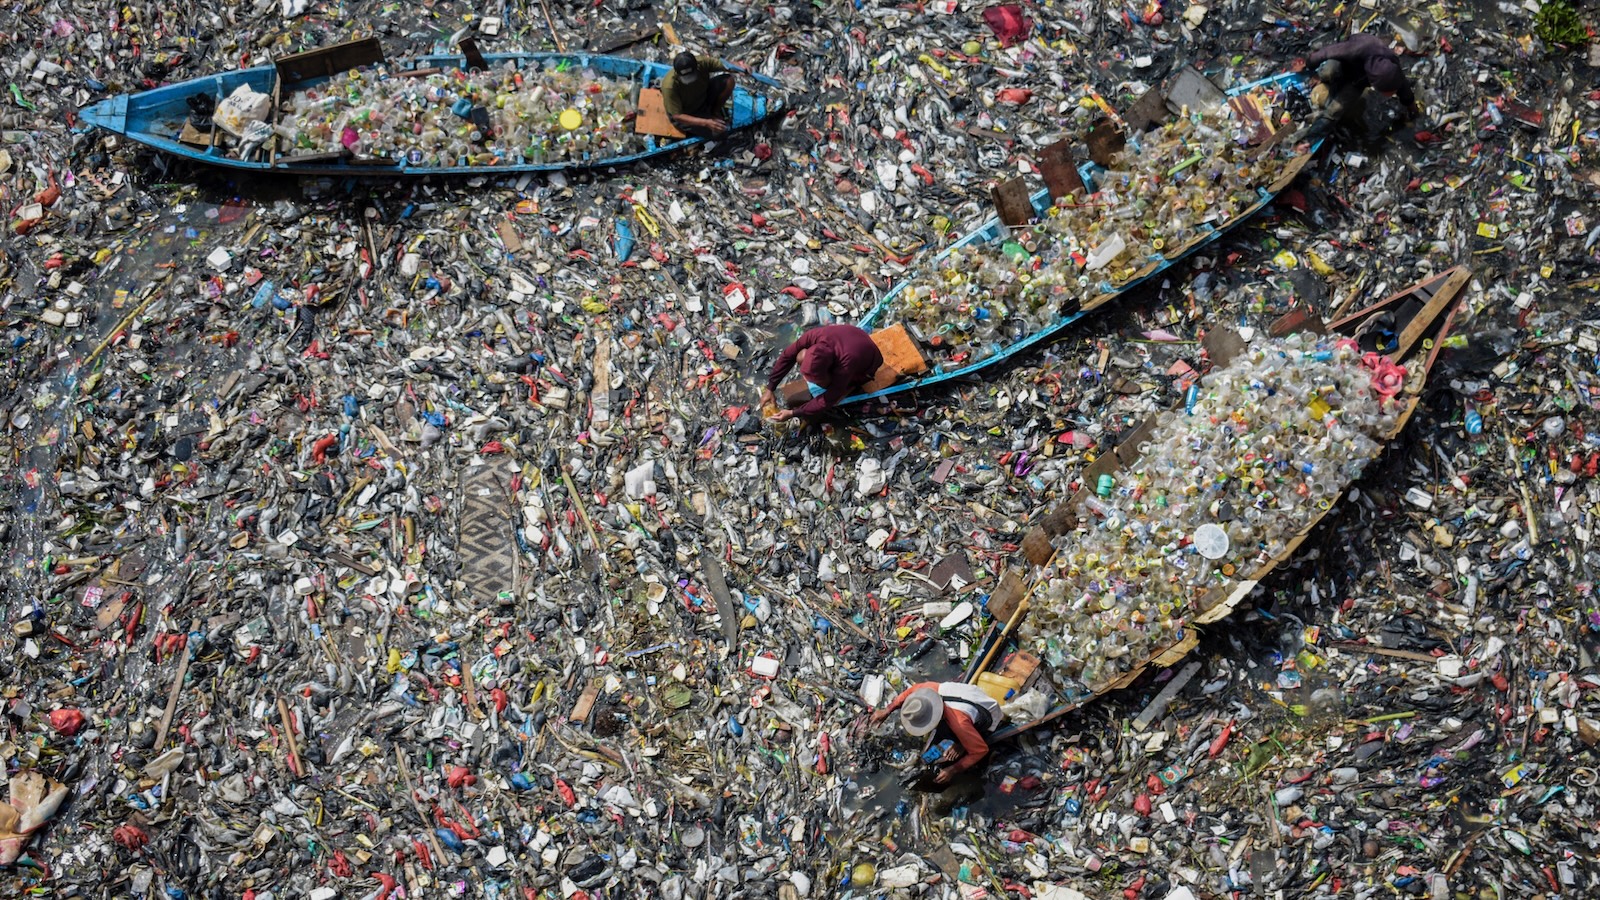 One way a plastics treaty could help the Global South: Fund waste management